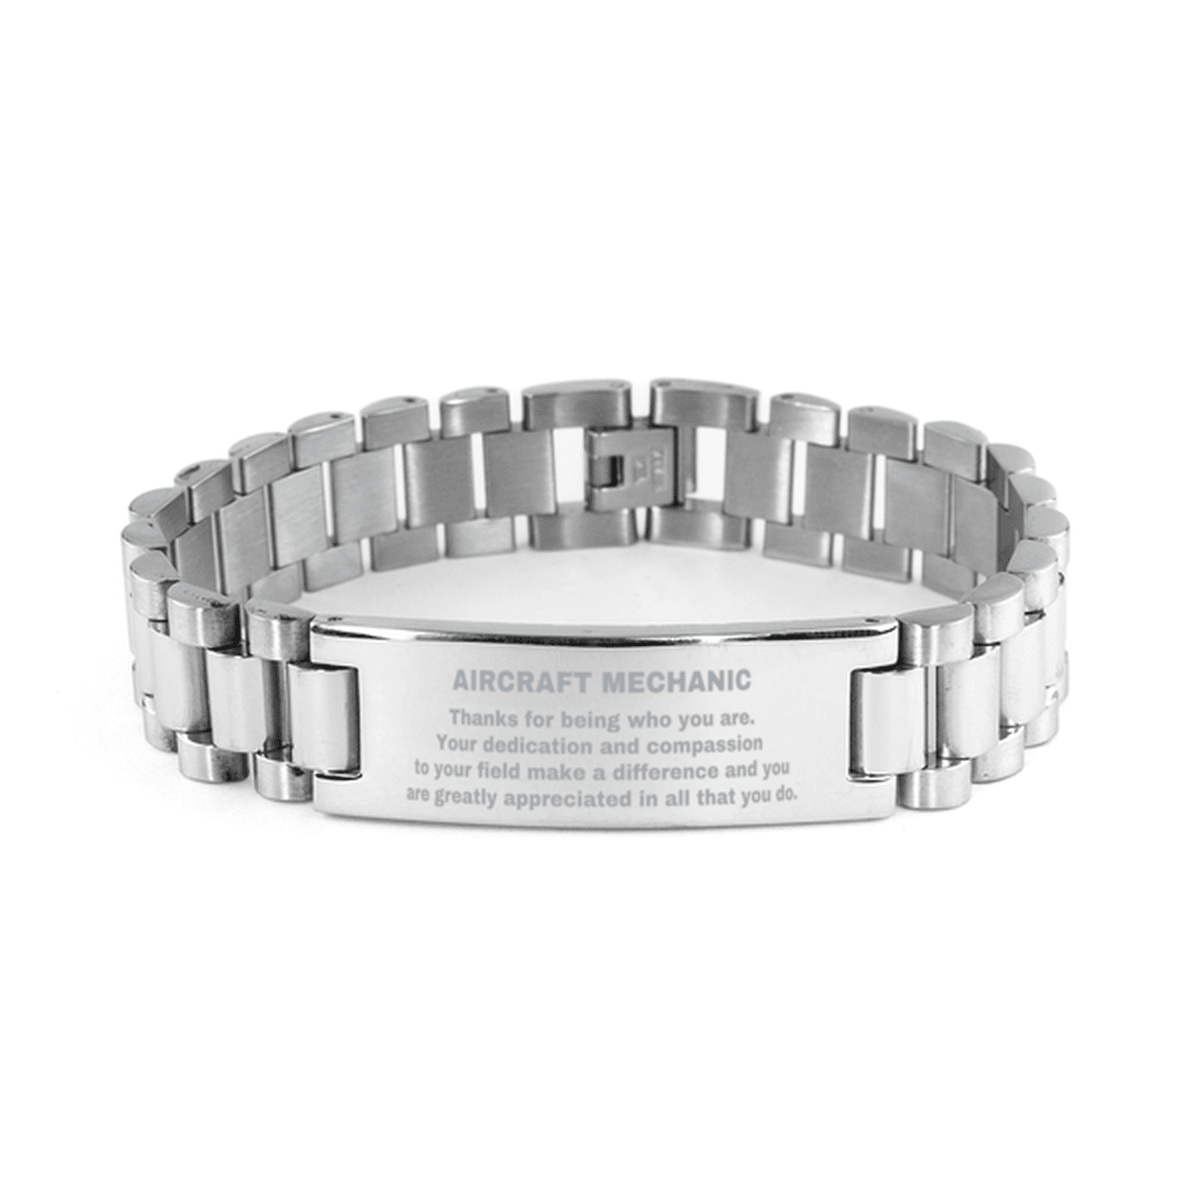 Aircraft Mechanic Ladder Stainless Steel Engraved Bracelet - Thanks for being who you are - Birthday Christmas Jewelry Gifts Coworkers Colleague Boss - Mallard Moon Gift Shop